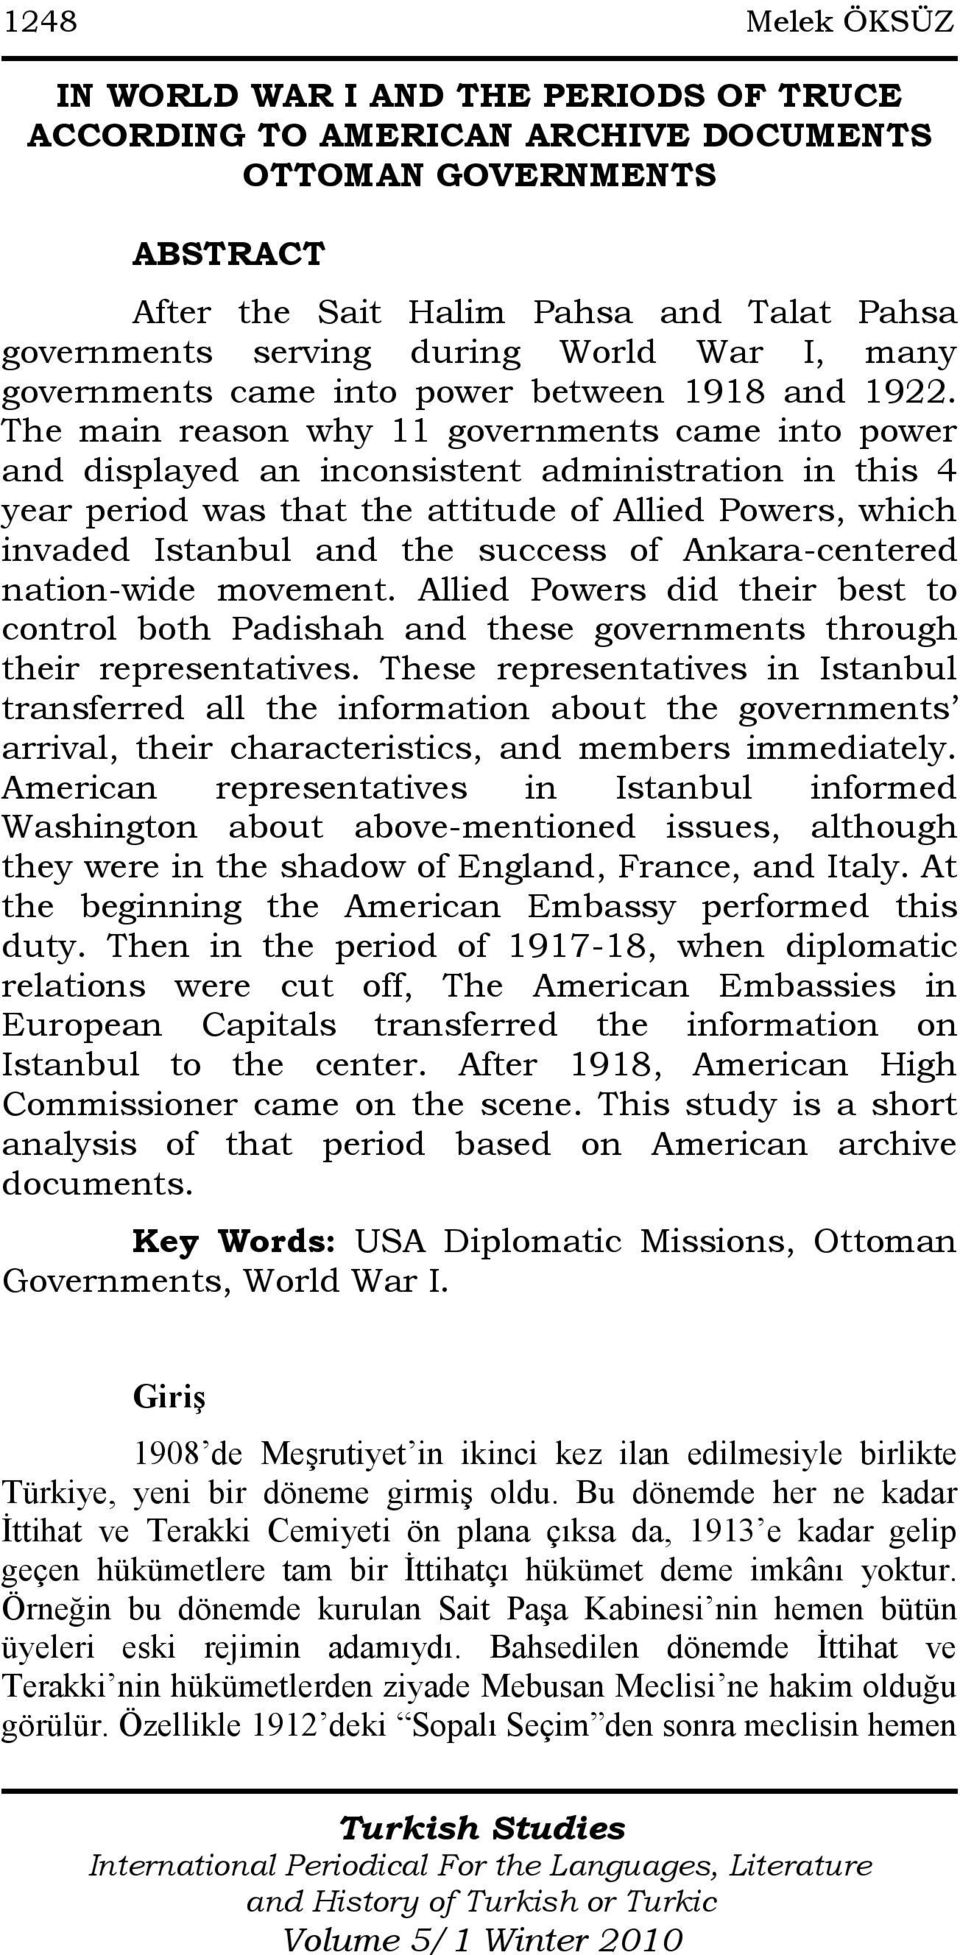 The main reason why 11 governments came into power and displayed an inconsistent administration in this 4 year period was that the attitude of Allied Powers, which invaded Istanbul and the success of